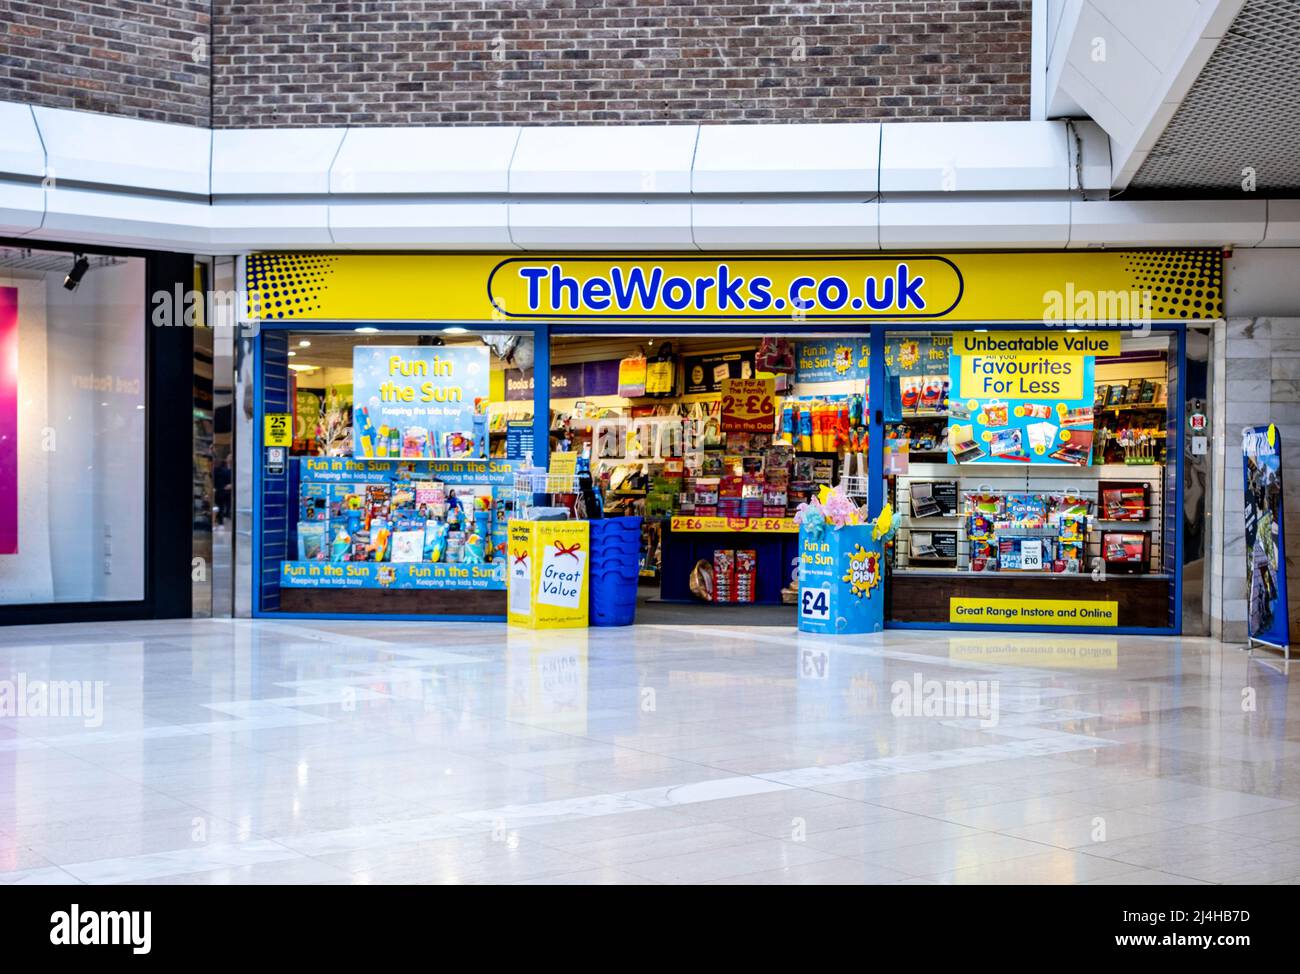 Epsom Surrey London, April 15 2022, The Works Art And Craft High Street Retailer Chain With No People Stockfoto